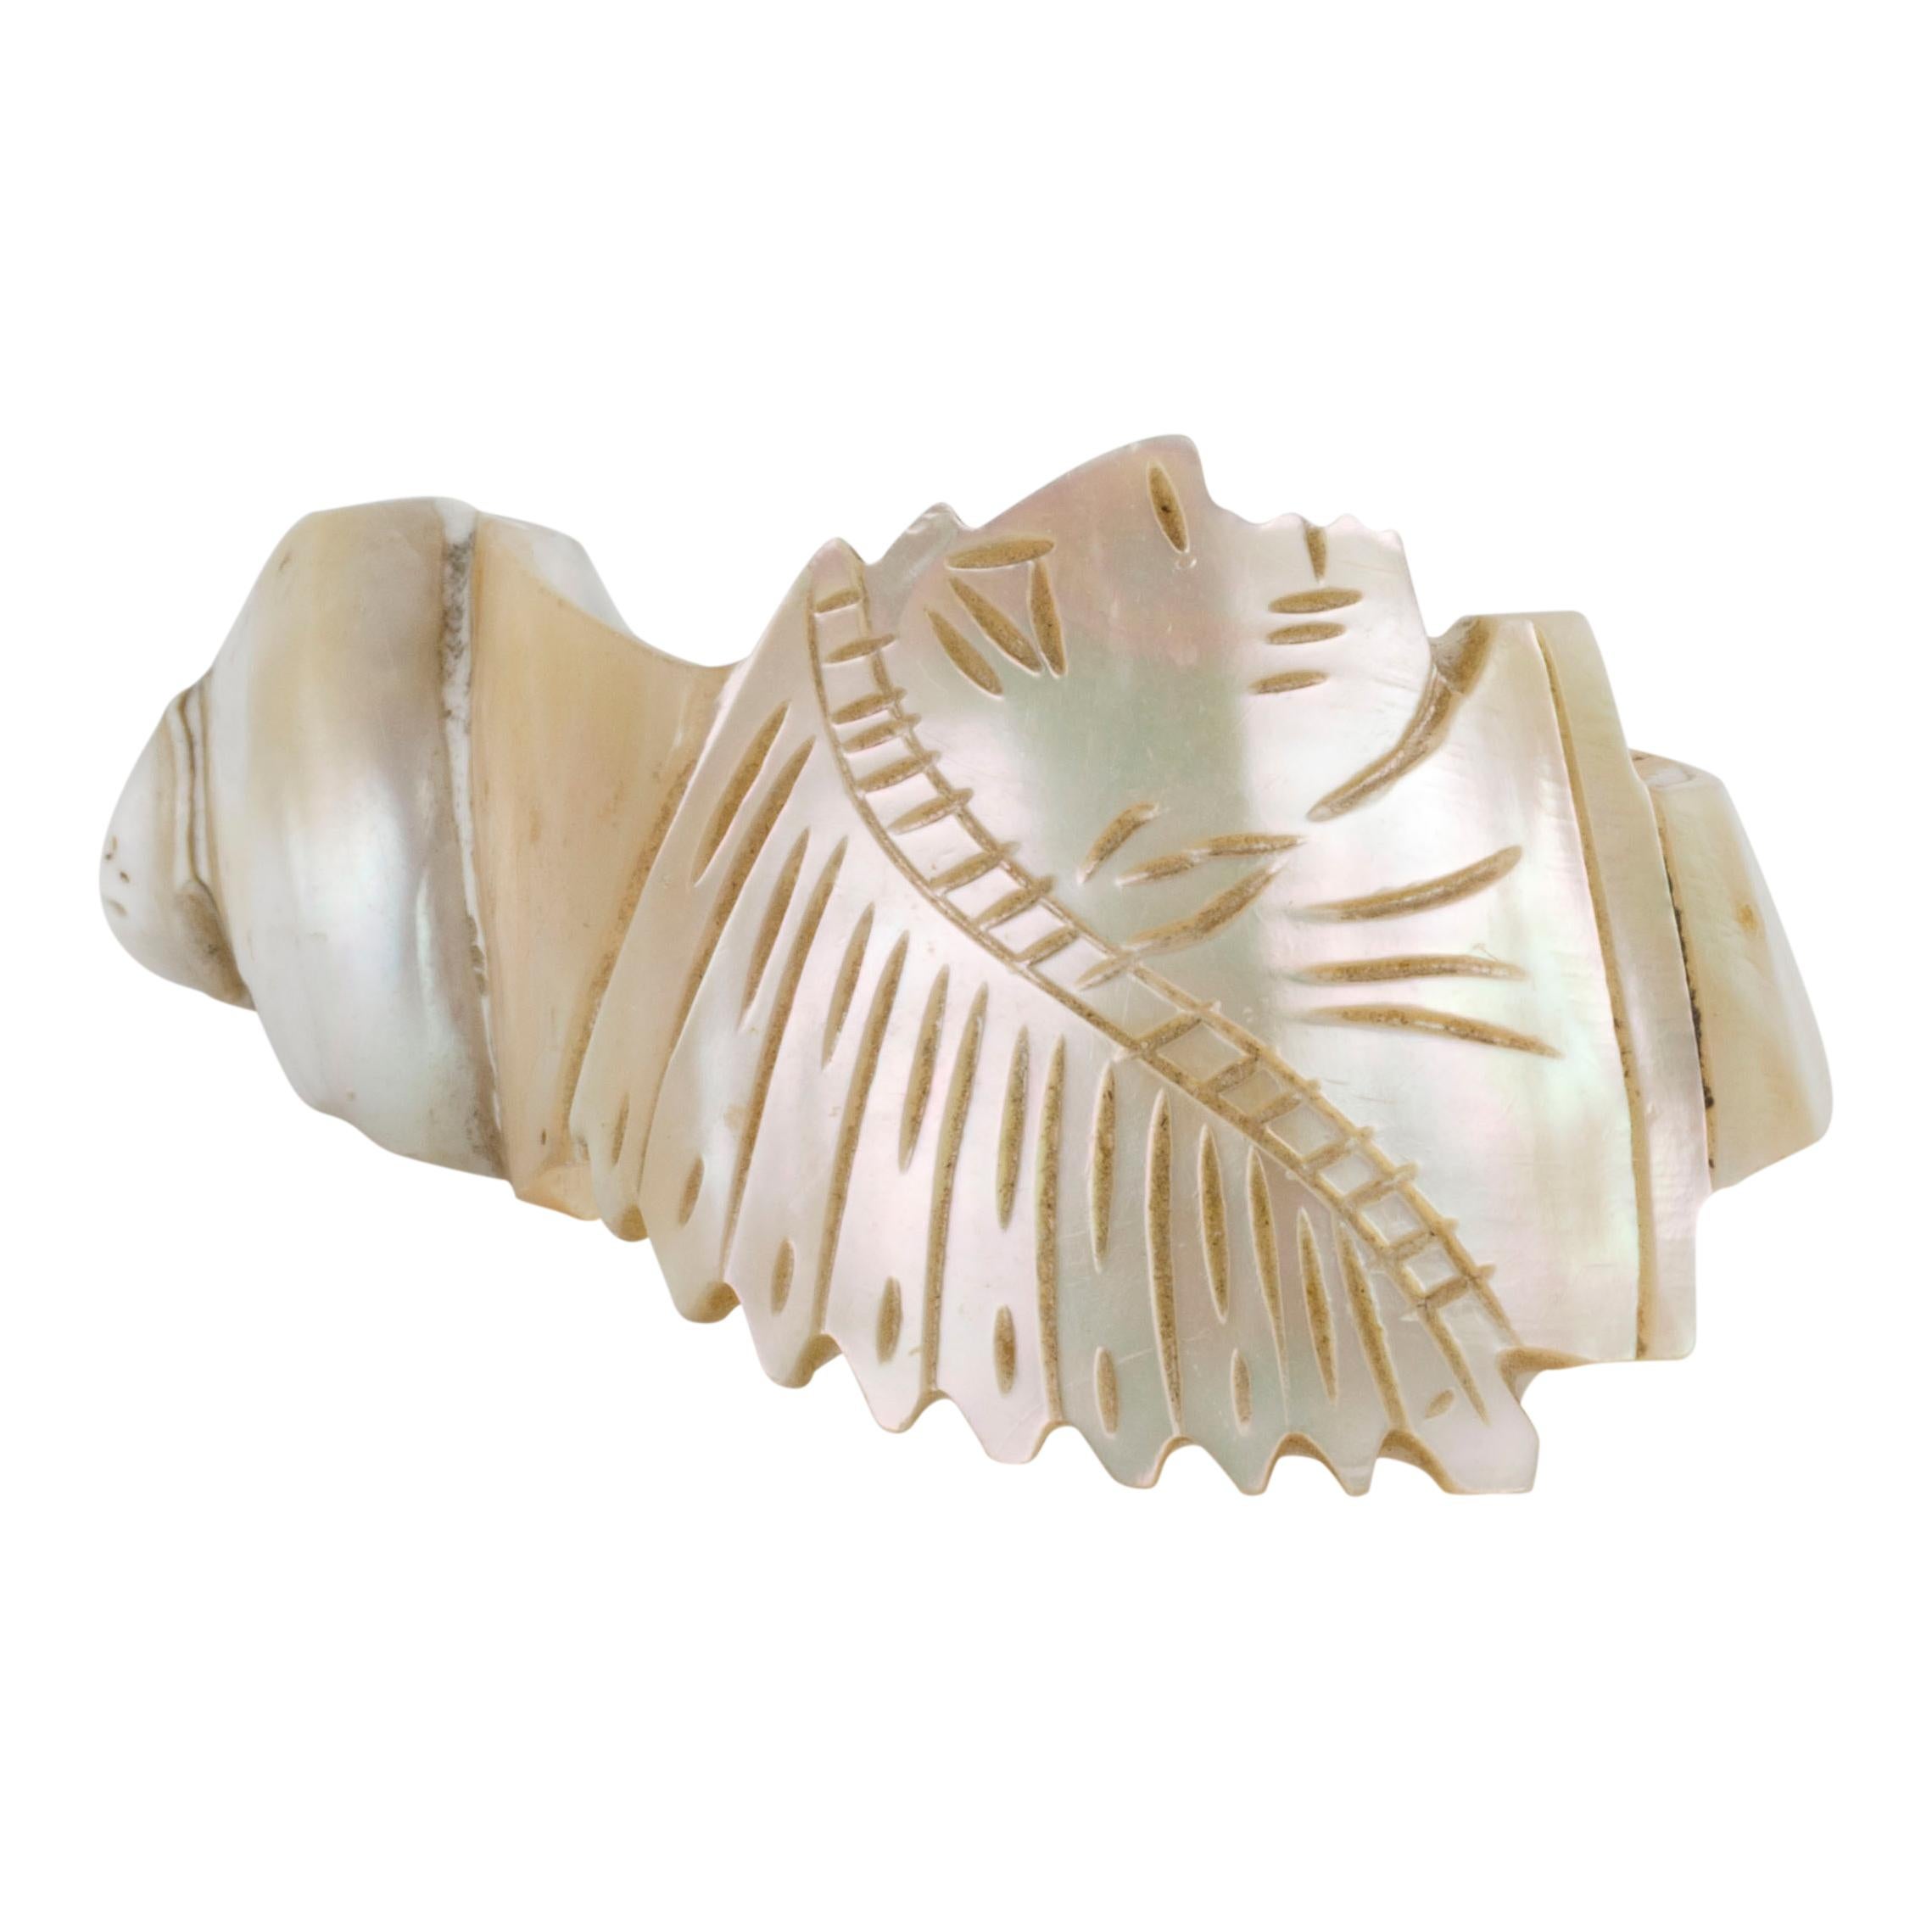 Collection of 4 1890s Carved Conch Napkin Rings In Good Condition For Sale In Coeur d Alene, ID